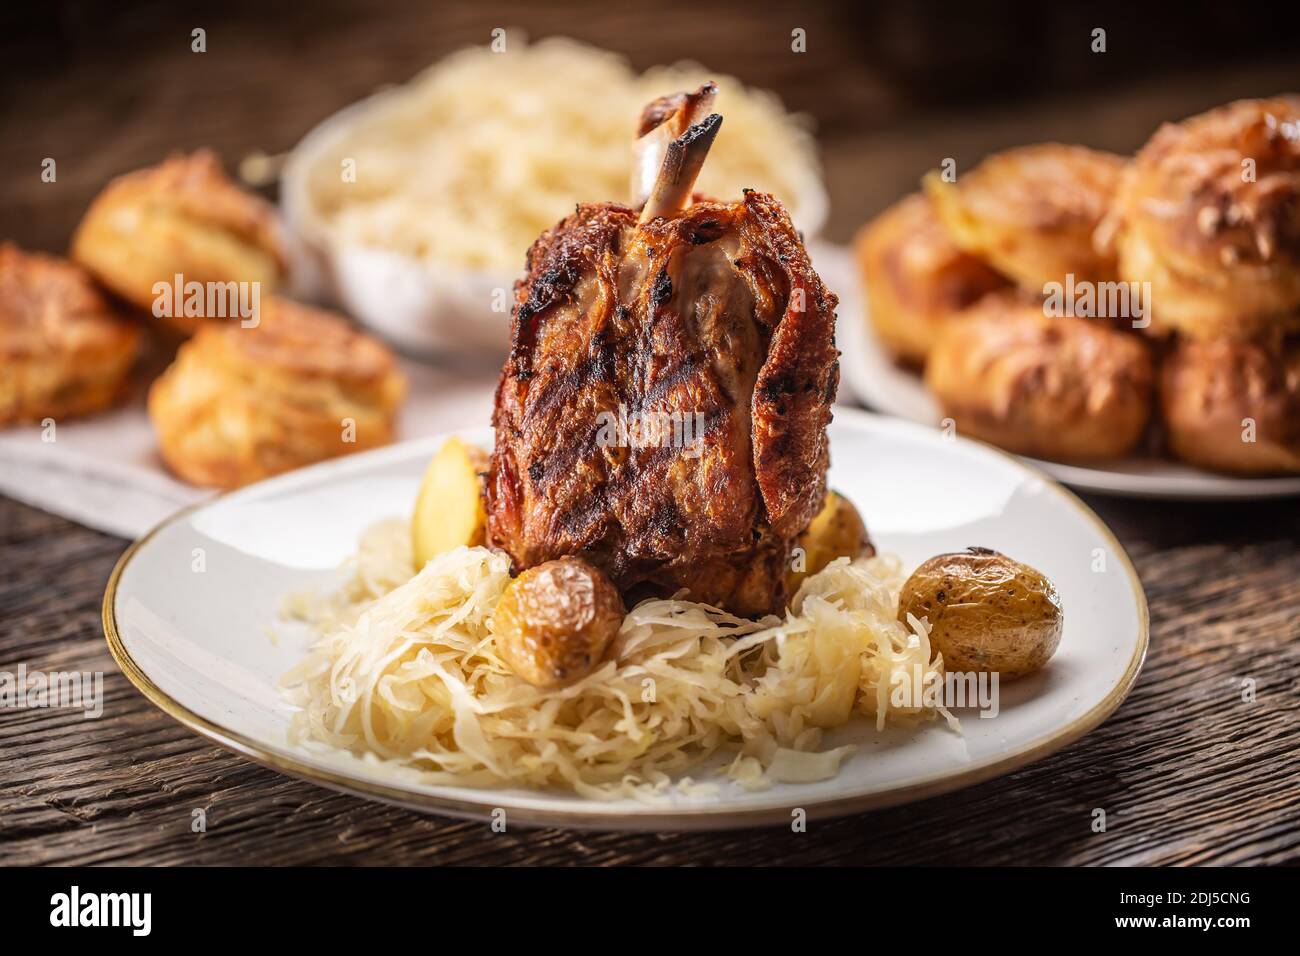 Baked pork knuckle served with sauerkraut and baked pastry. Stock Photo